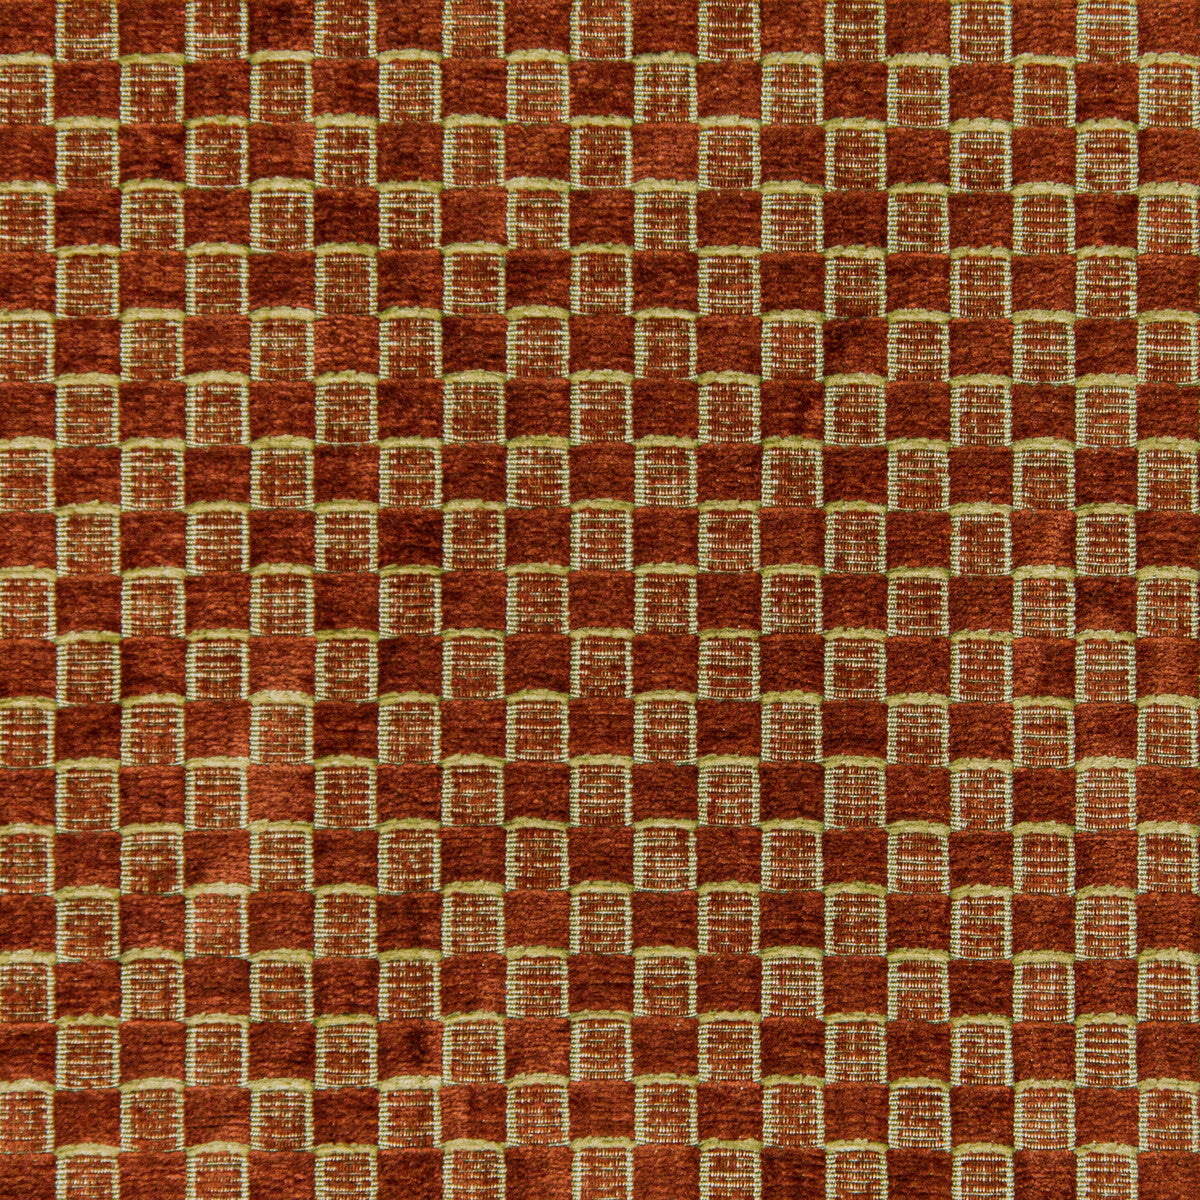 Allonby Weave fabric in cinnabar color - pattern 2020101.24.0 - by Lee Jofa in the Linford Weaves collection